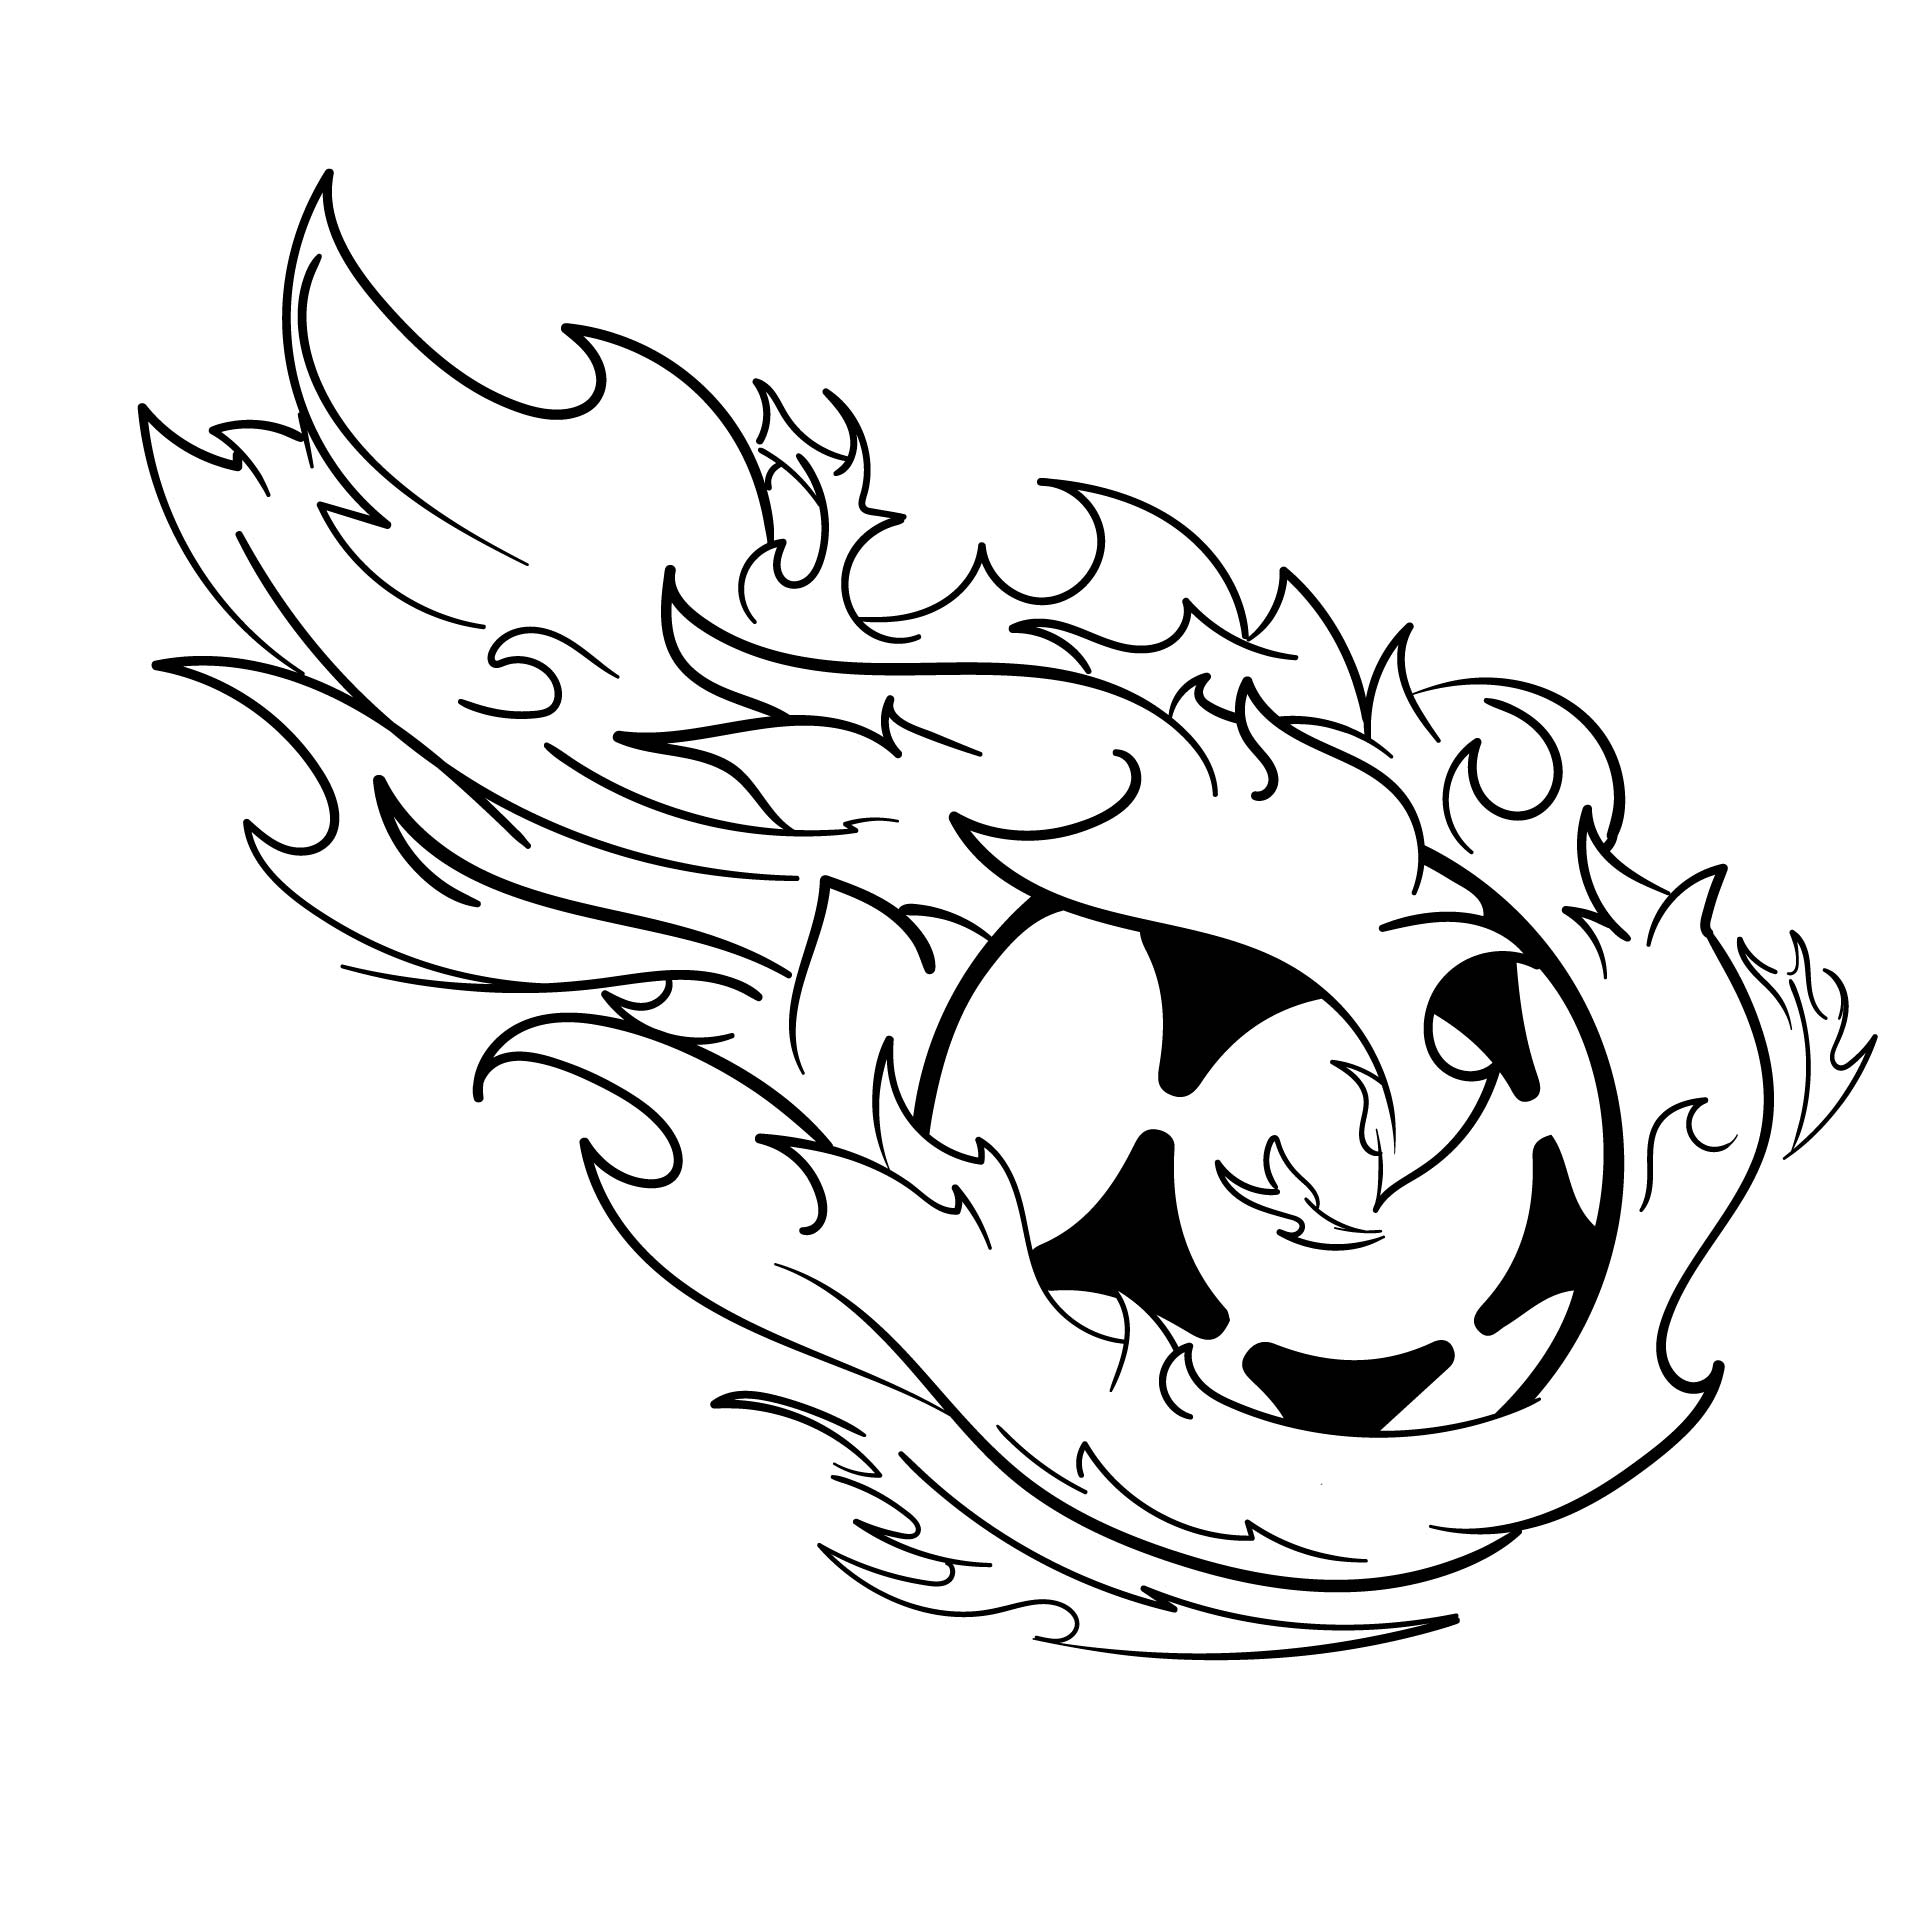 Printable Soccer Ball On Fire Coloring Page